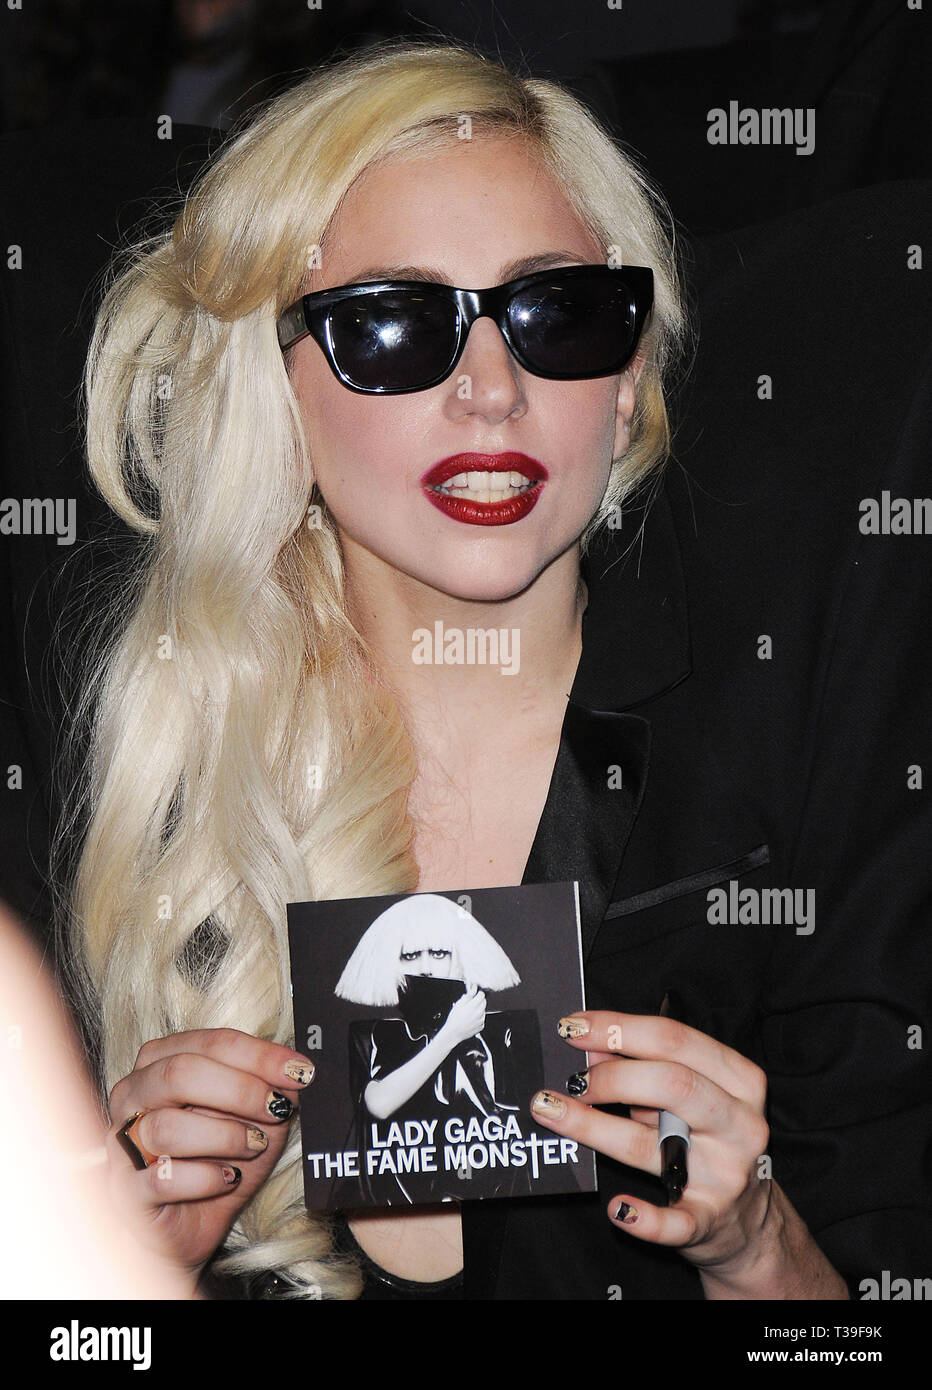 LADY GAGA - promoting new CD The Fame Monster in Los Angeles.Lady Gaga  05 Red Carpet Event, Vertical, USA, Film Industry, Celebrities,  Photography, Bestof, Arts Culture and Entertainment, Topix Celebrities fashion /  Vertical, Best of, Event in Hollywood Life - California,  Red Carpet and backstage, USA, Film Industry, Celebrities,  movie celebrities, TV celebrities, Music celebrities, Photography, Bestof, Arts Culture and Entertainment,  Topix, headshot, vertical, one person,, from the year , 2009, inquiry tsuni@Gamma-USA.com Stock Photo